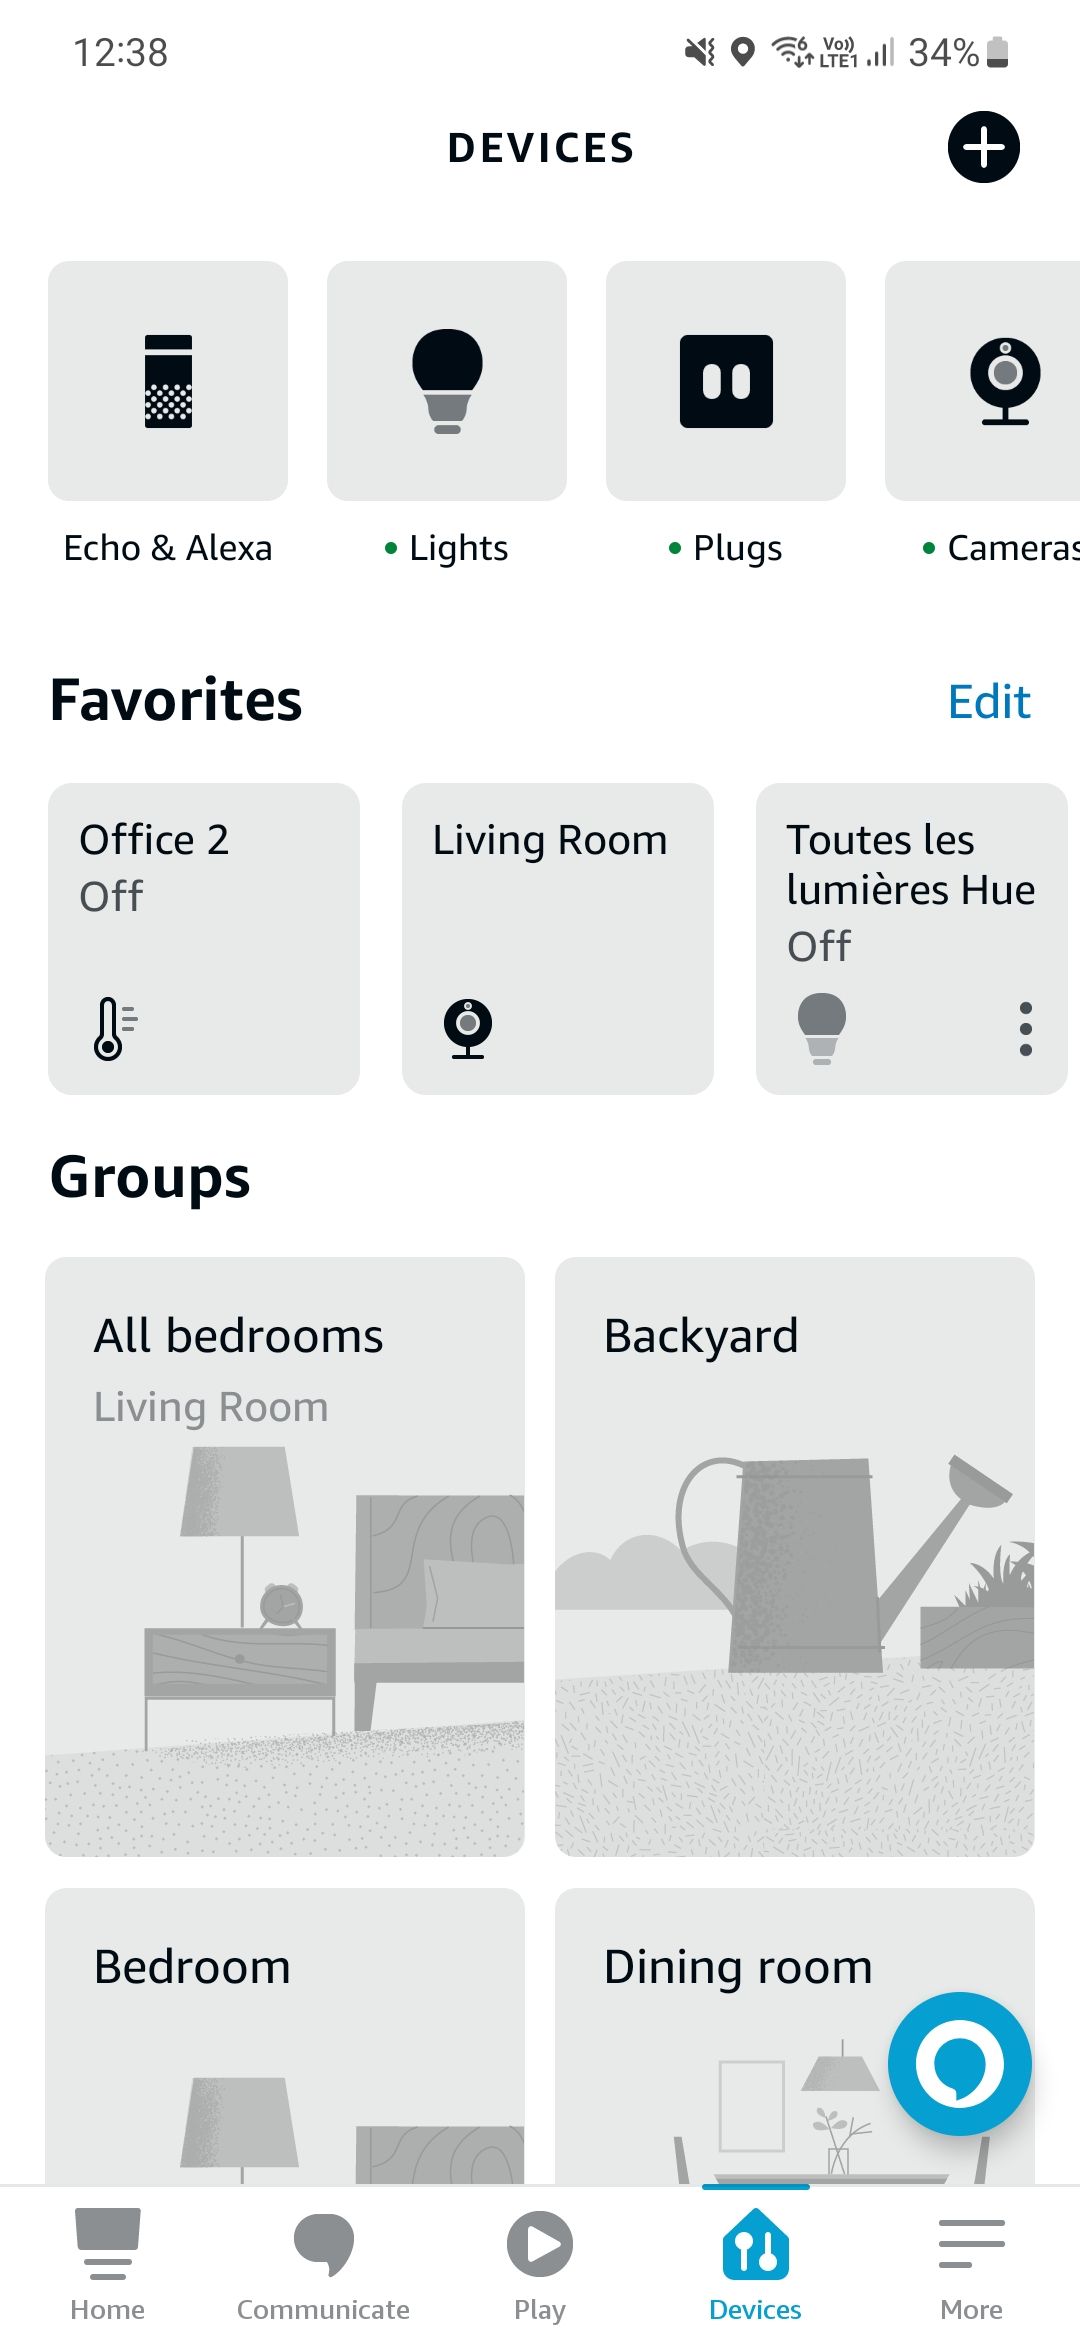 A screenshot showing the devices in Alexa